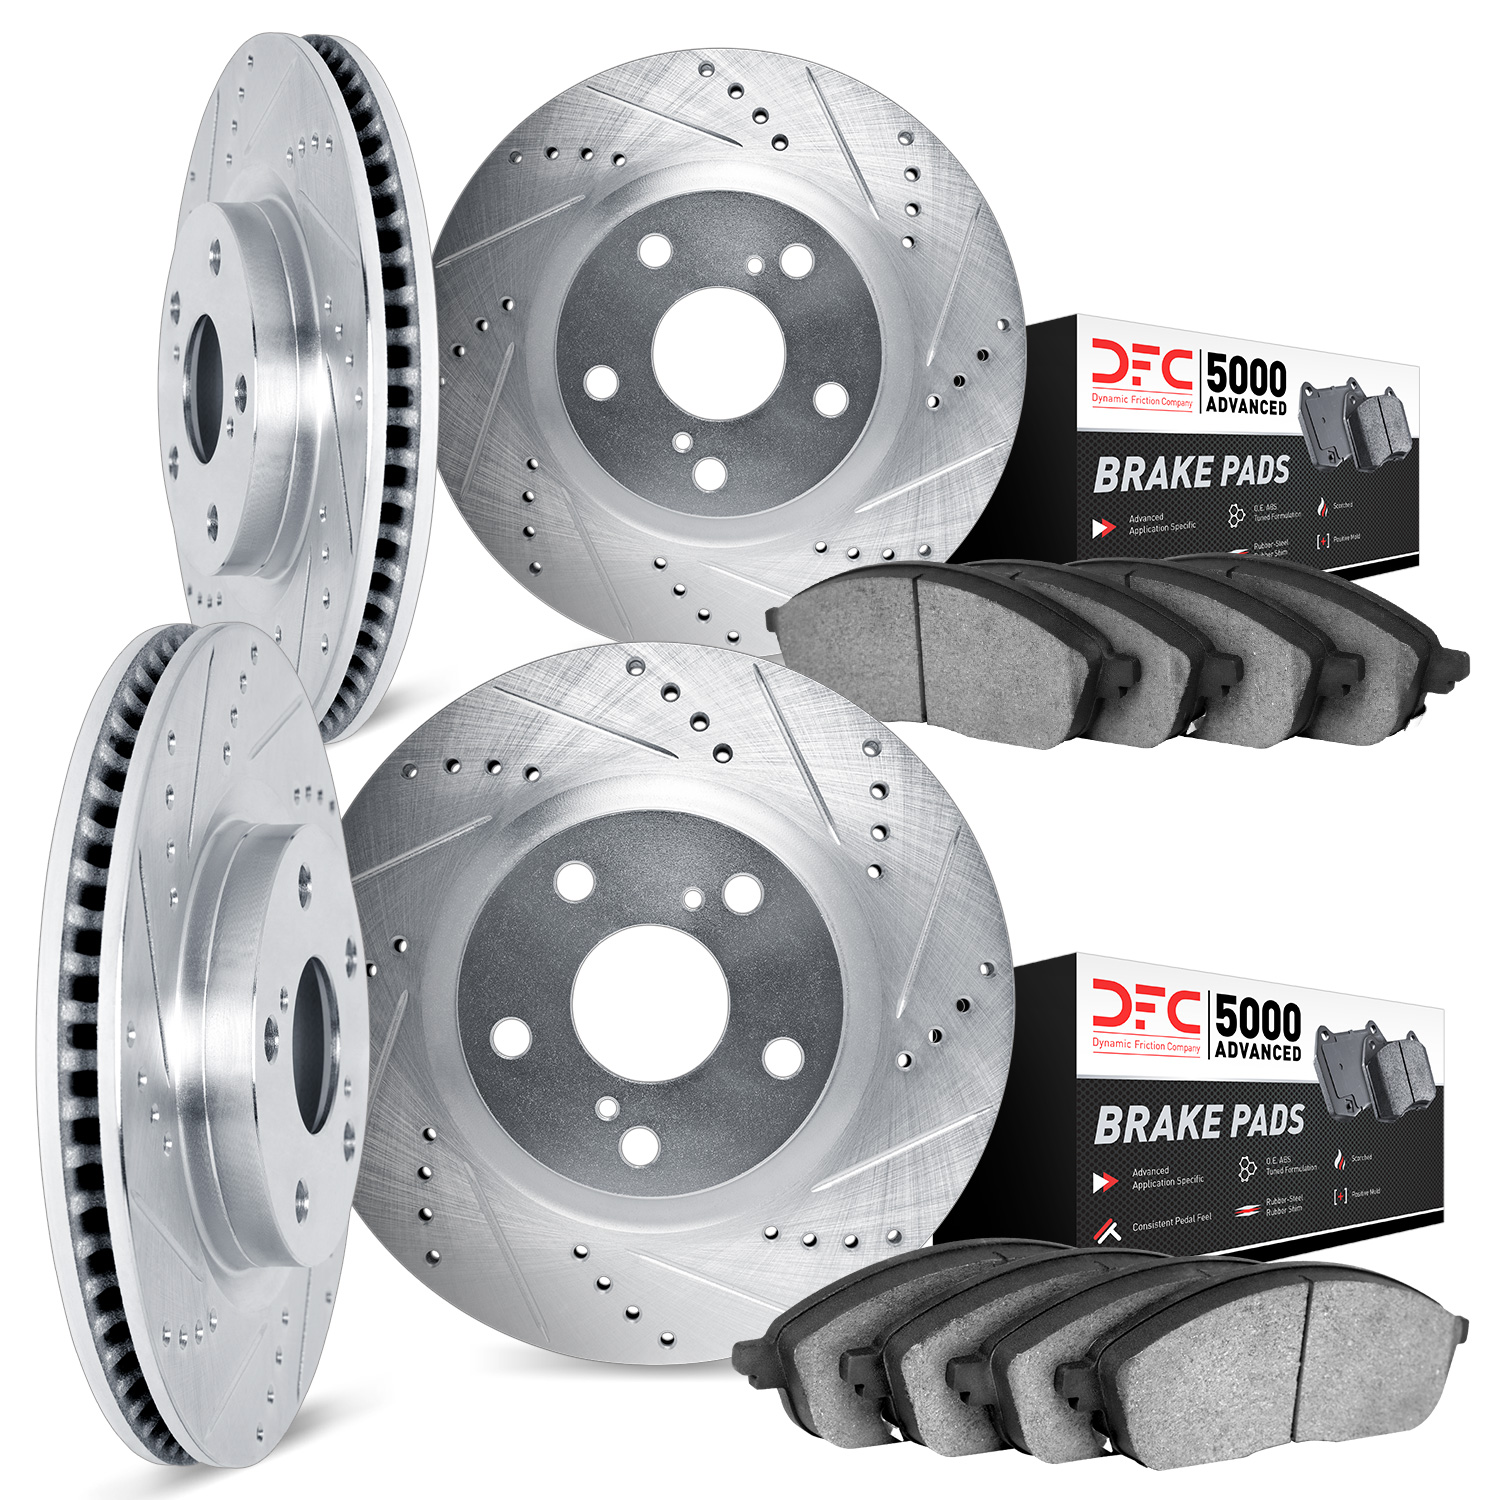 7504-47244 Drilled/Slotted Brake Rotors w/5000 Advanced Brake Pads Kit [Silver], 1984-1987 GM, Position: Front and Rear